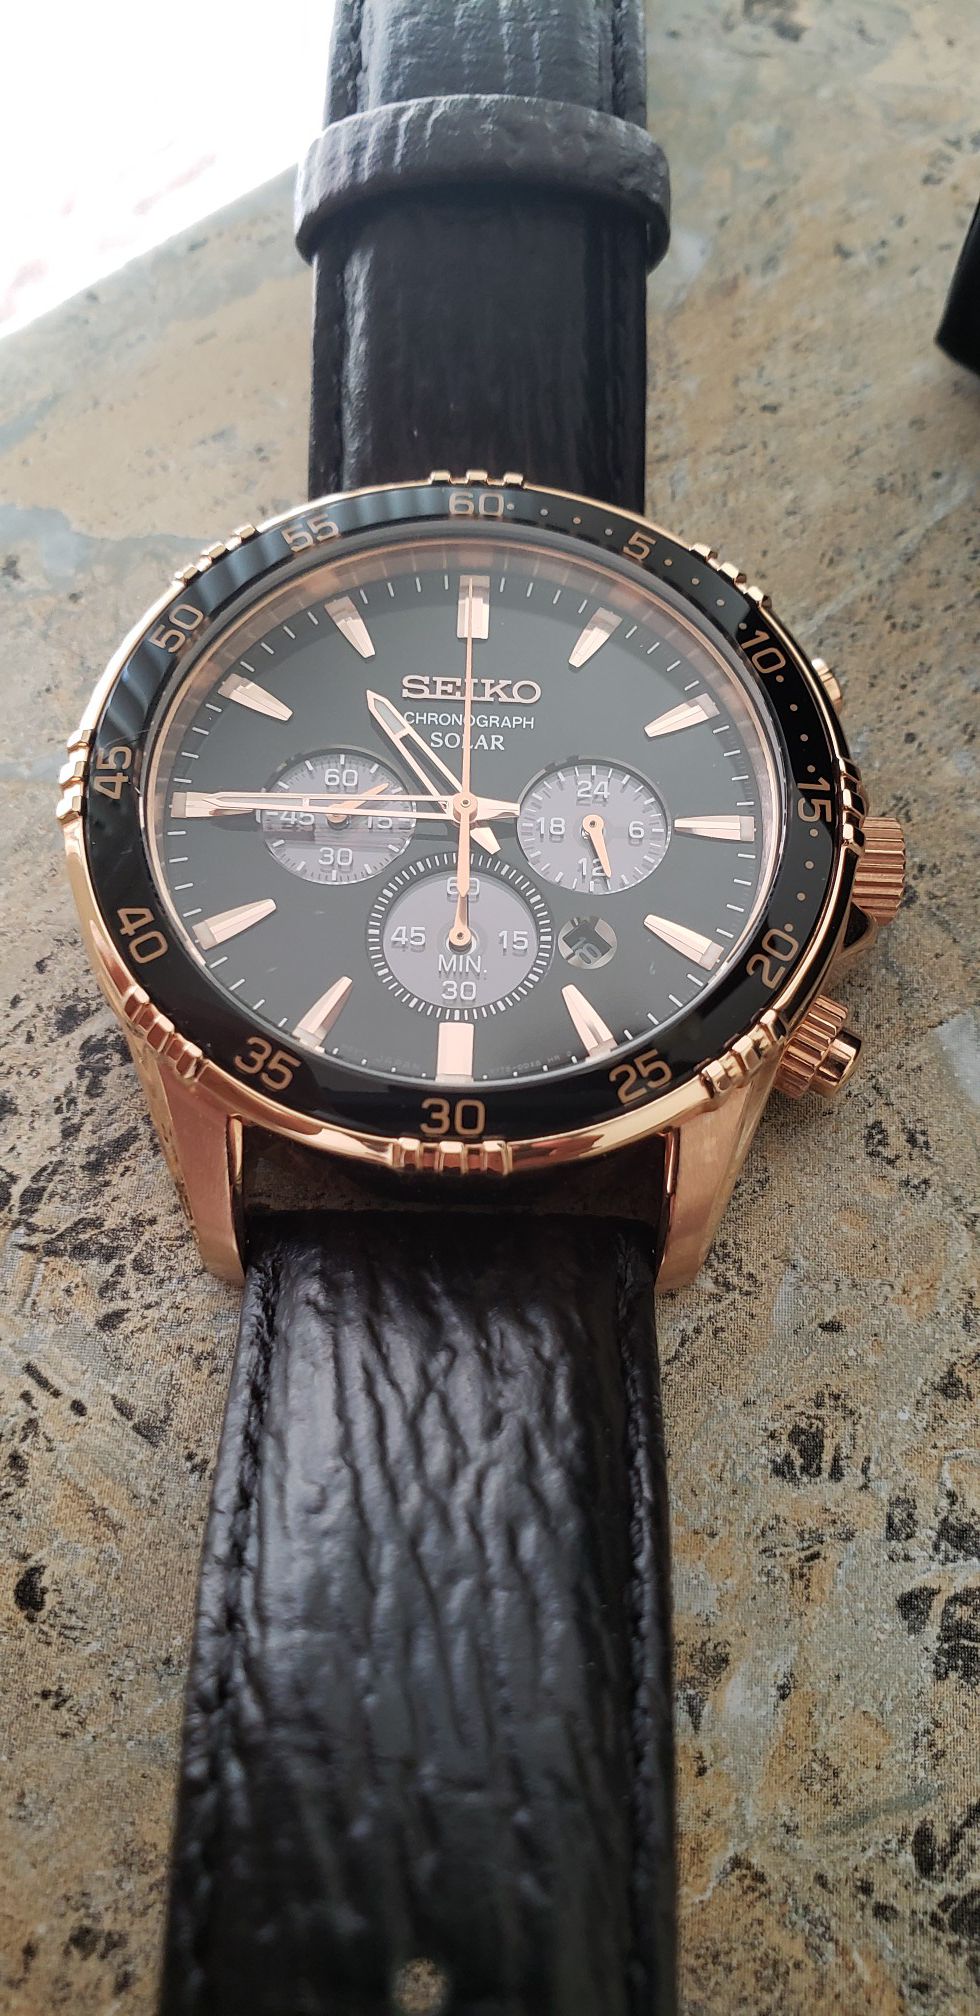 Seiko Solar Chronograph, Rose Gold - Box and tags included.